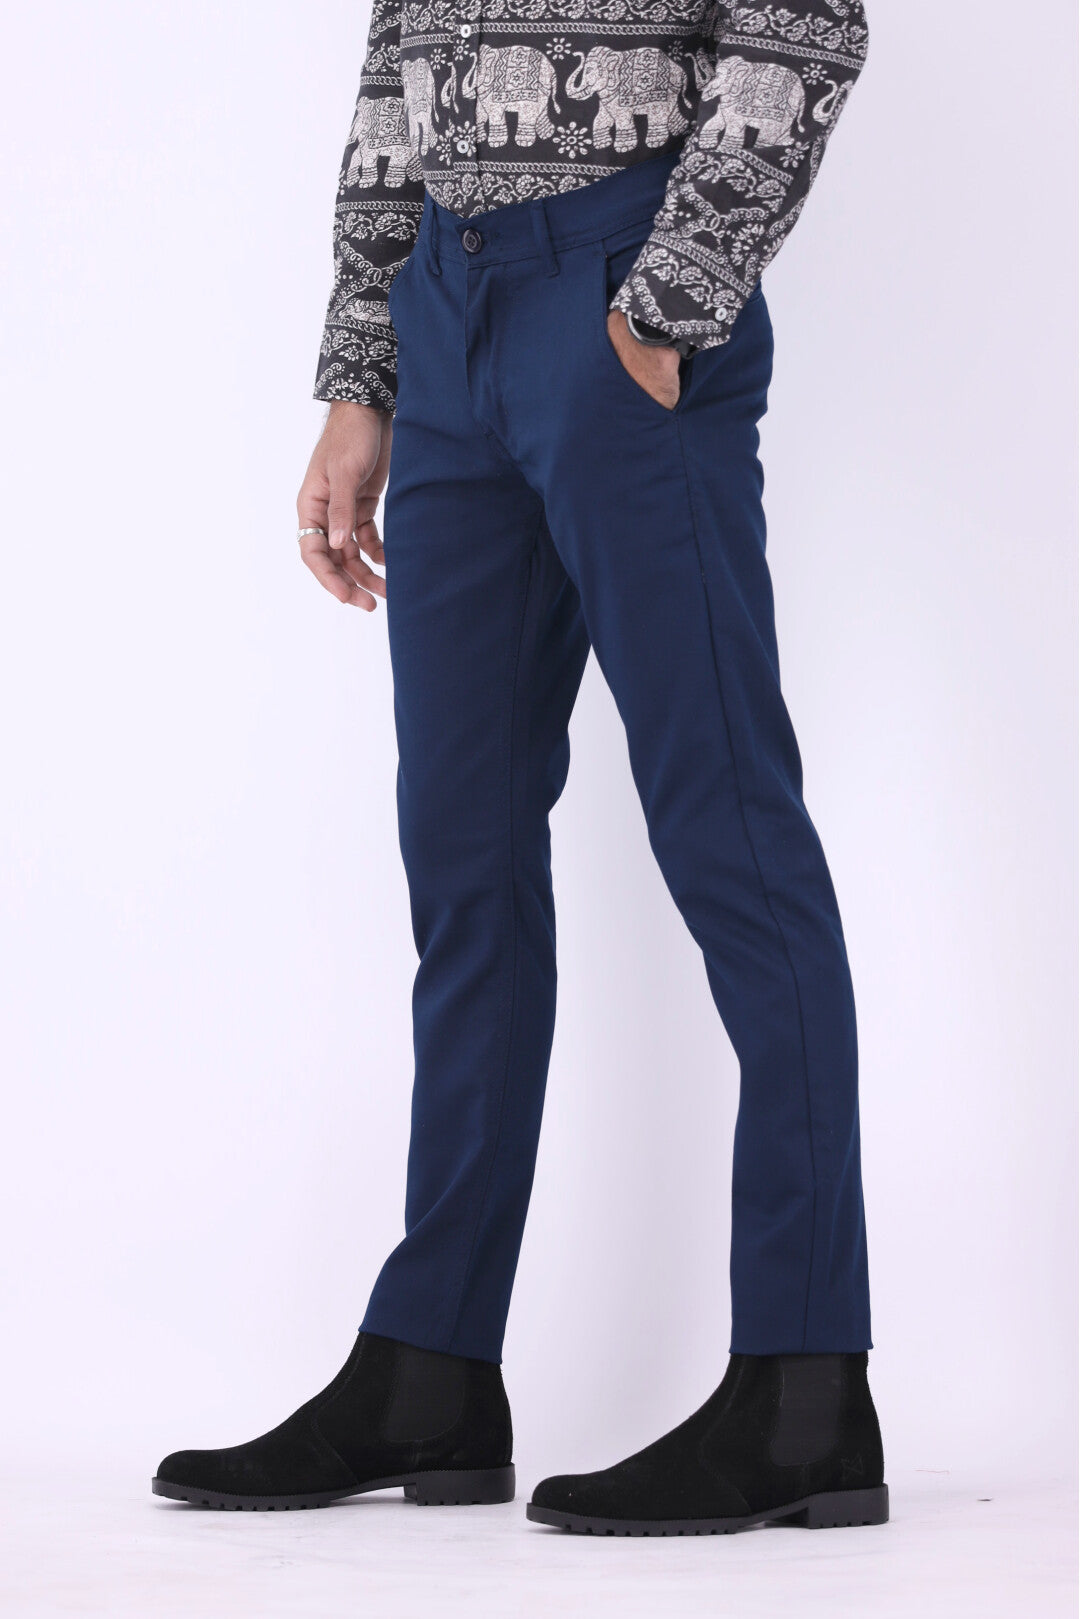 FT Cotton Chinos Pant - Blue